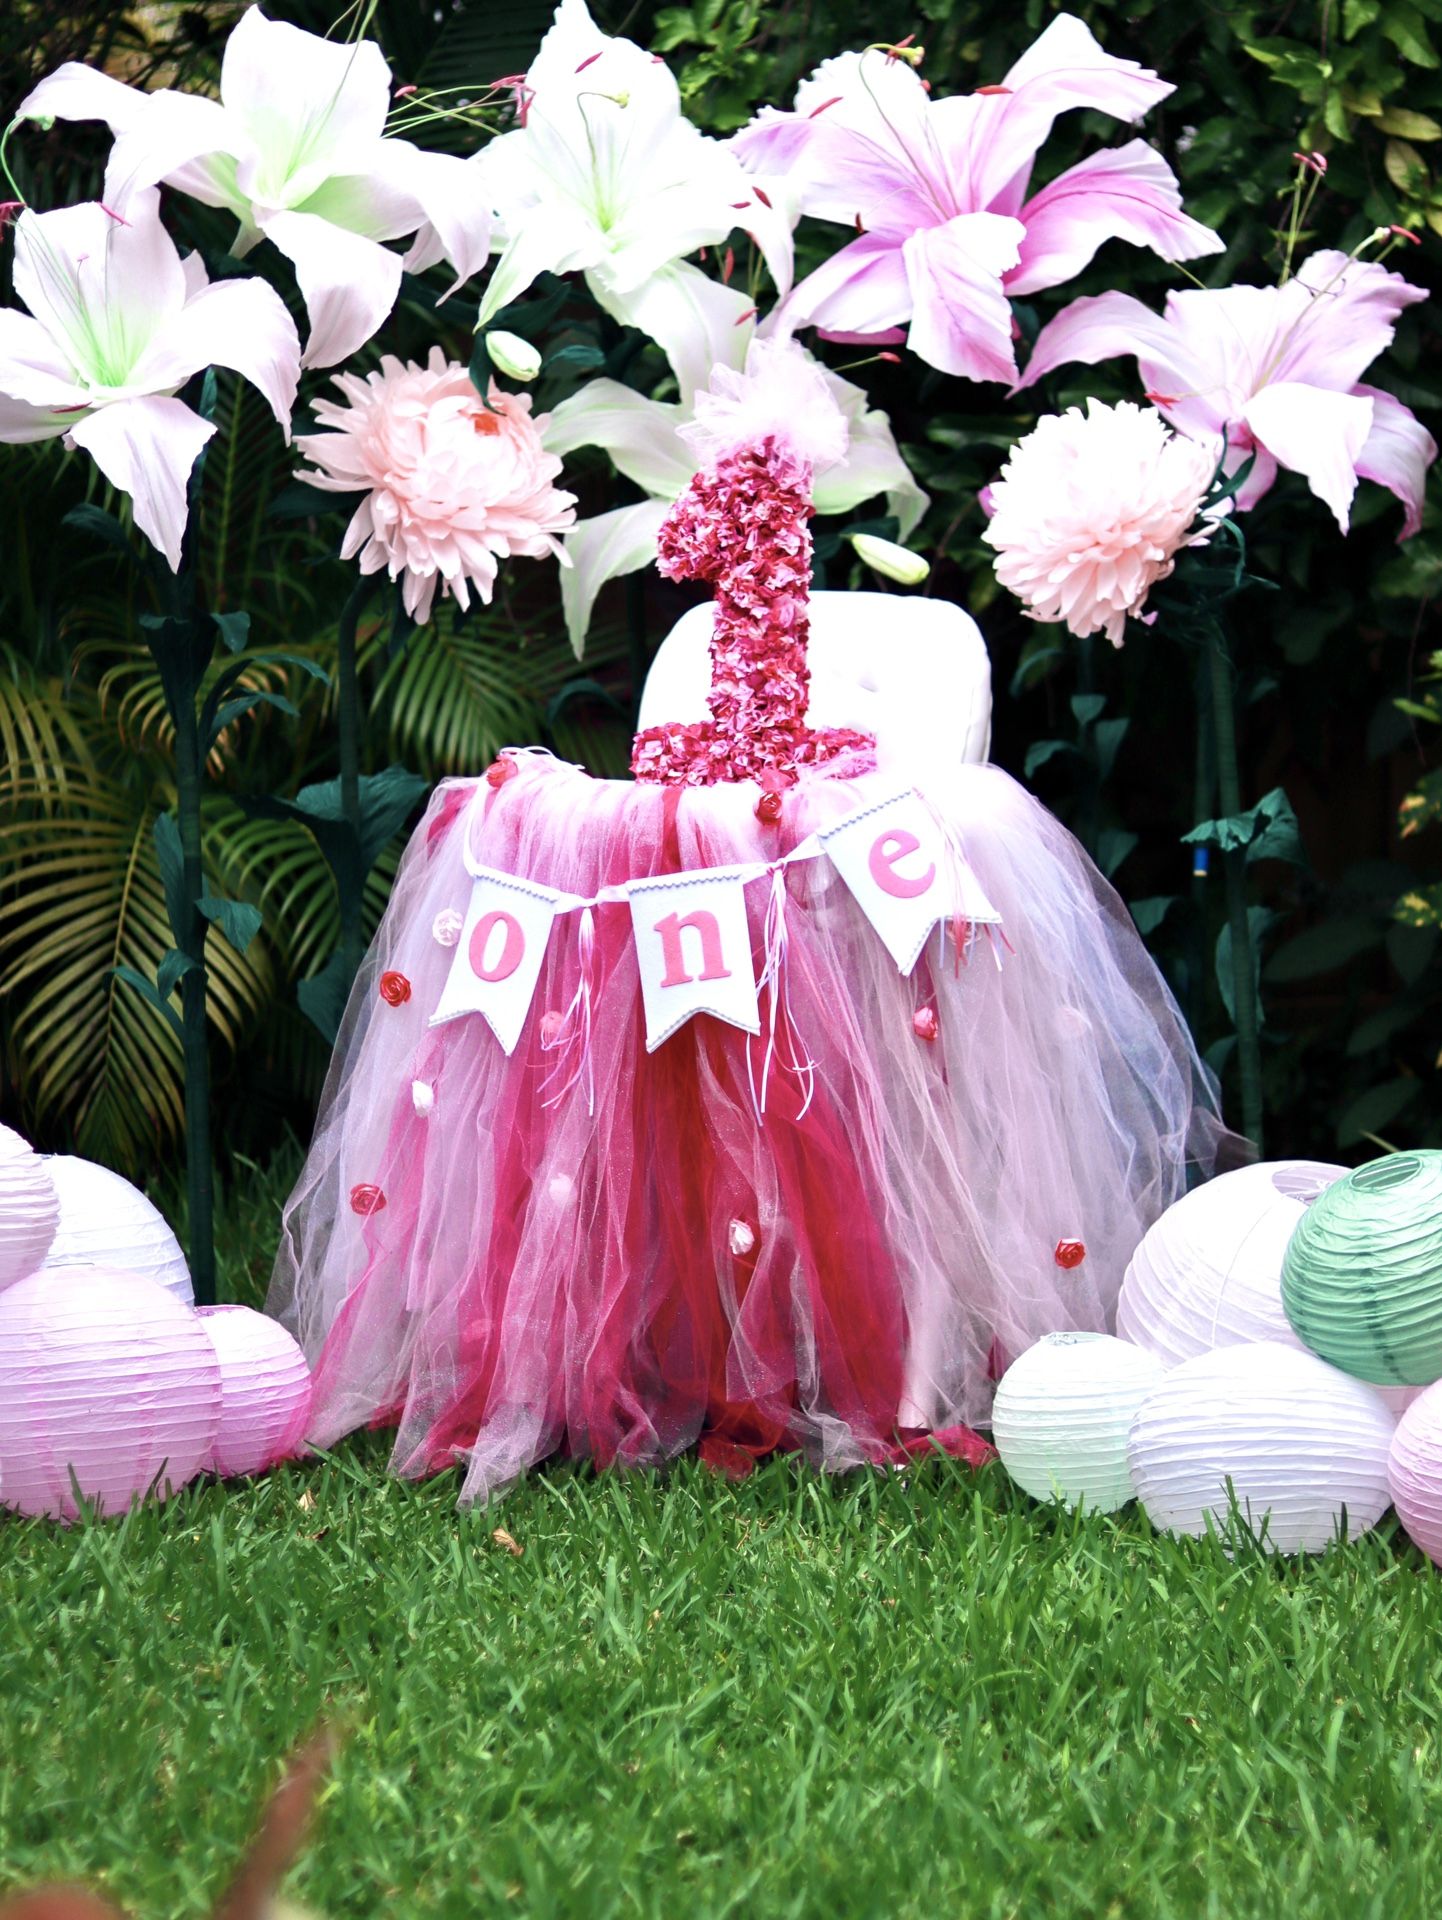 Giant Free Standing Flowers For Wedding Birthday Party Decor Photography  Backdrop 